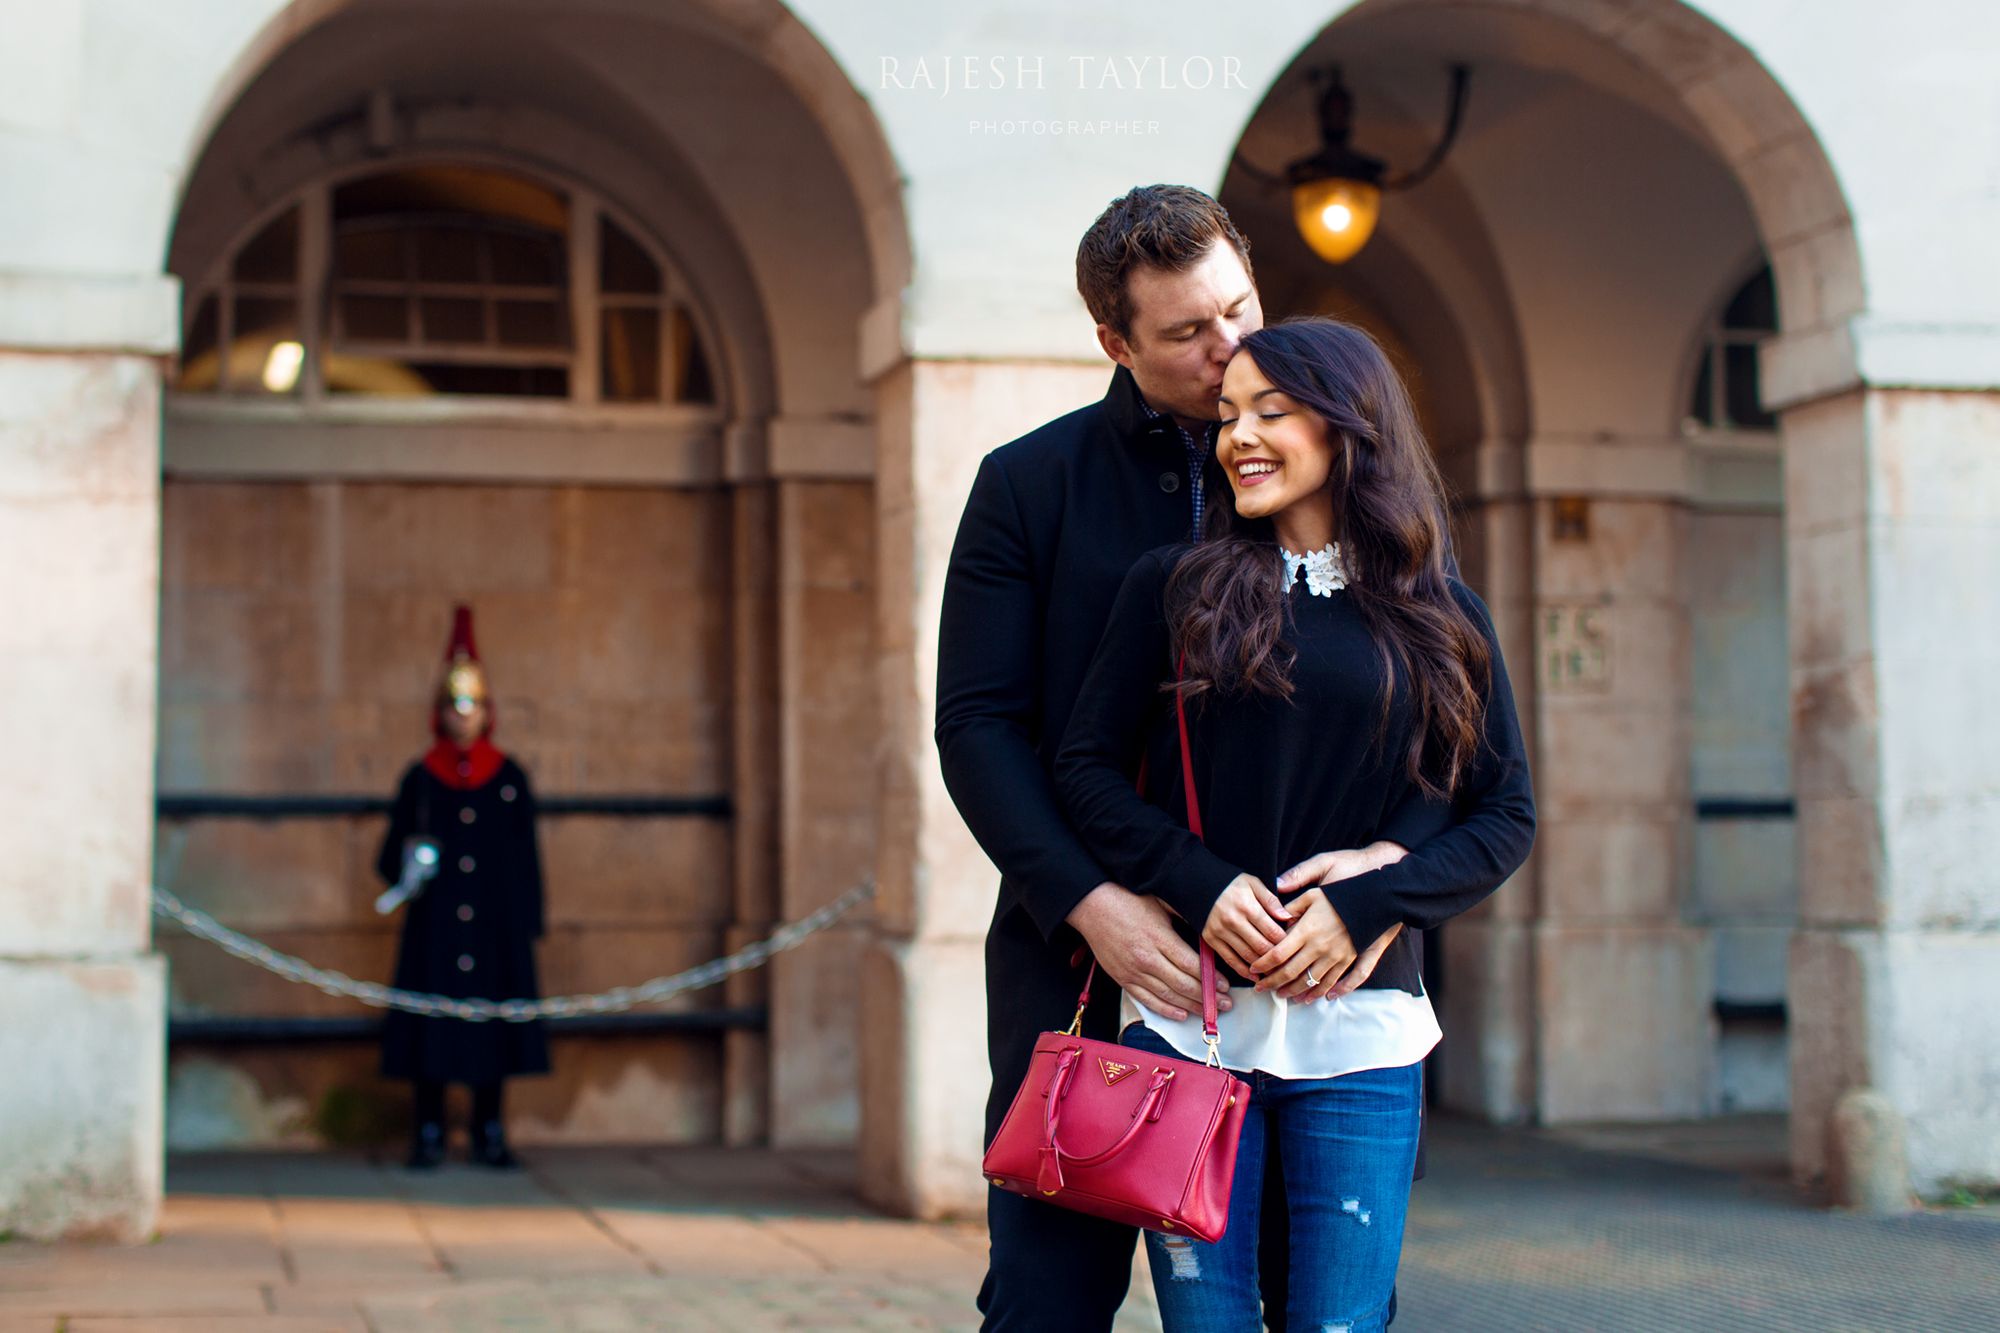 Brittany & Nate at Royal Horseguards Museum © Rajesh Taylor